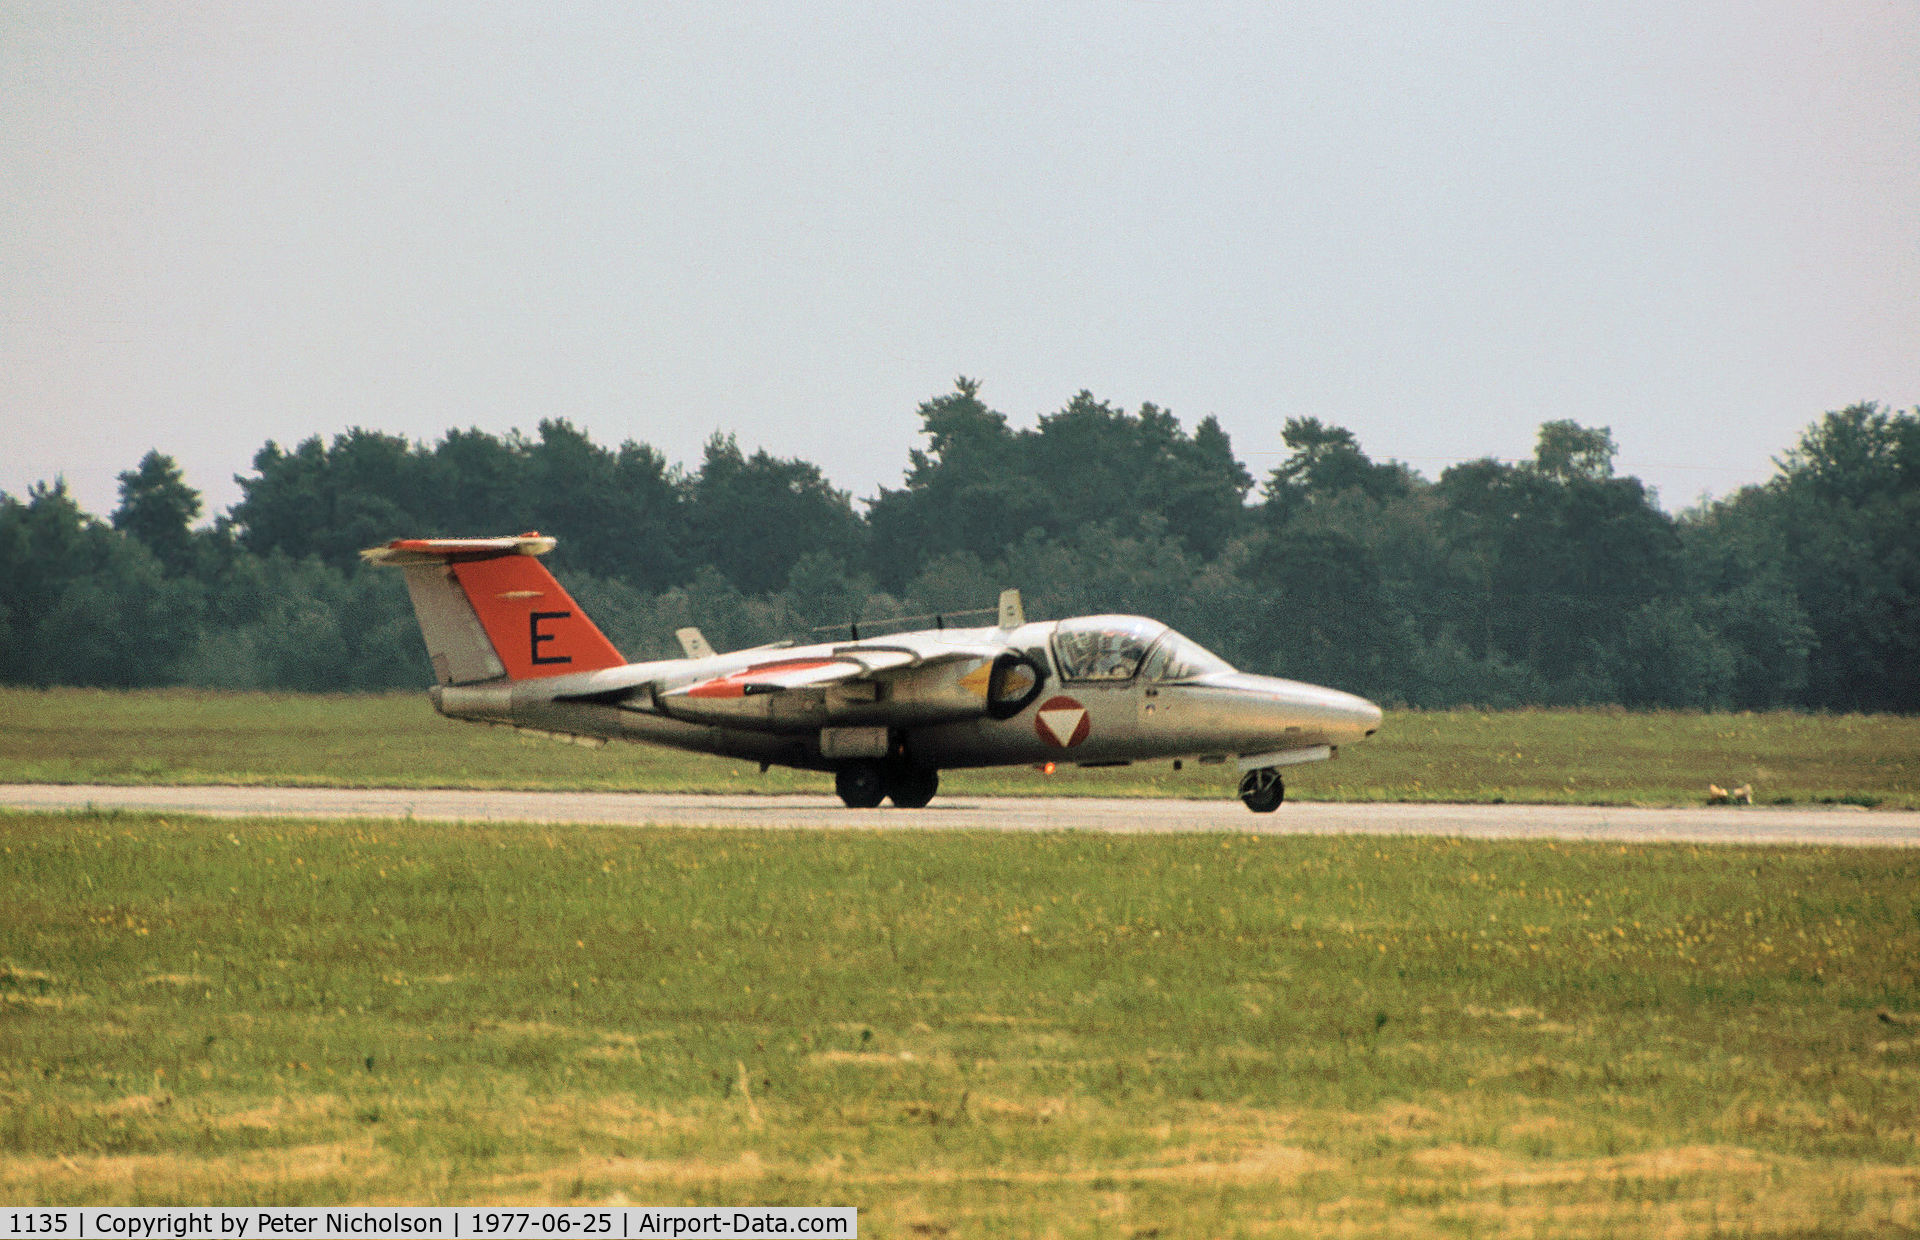 1135, Saab 105OE C/N 105435, Saab 105OE of the Austrian Air Force aerial demonstration team in action at the 1977 Intn'l Air Tattoo at RAF Greenham Common.